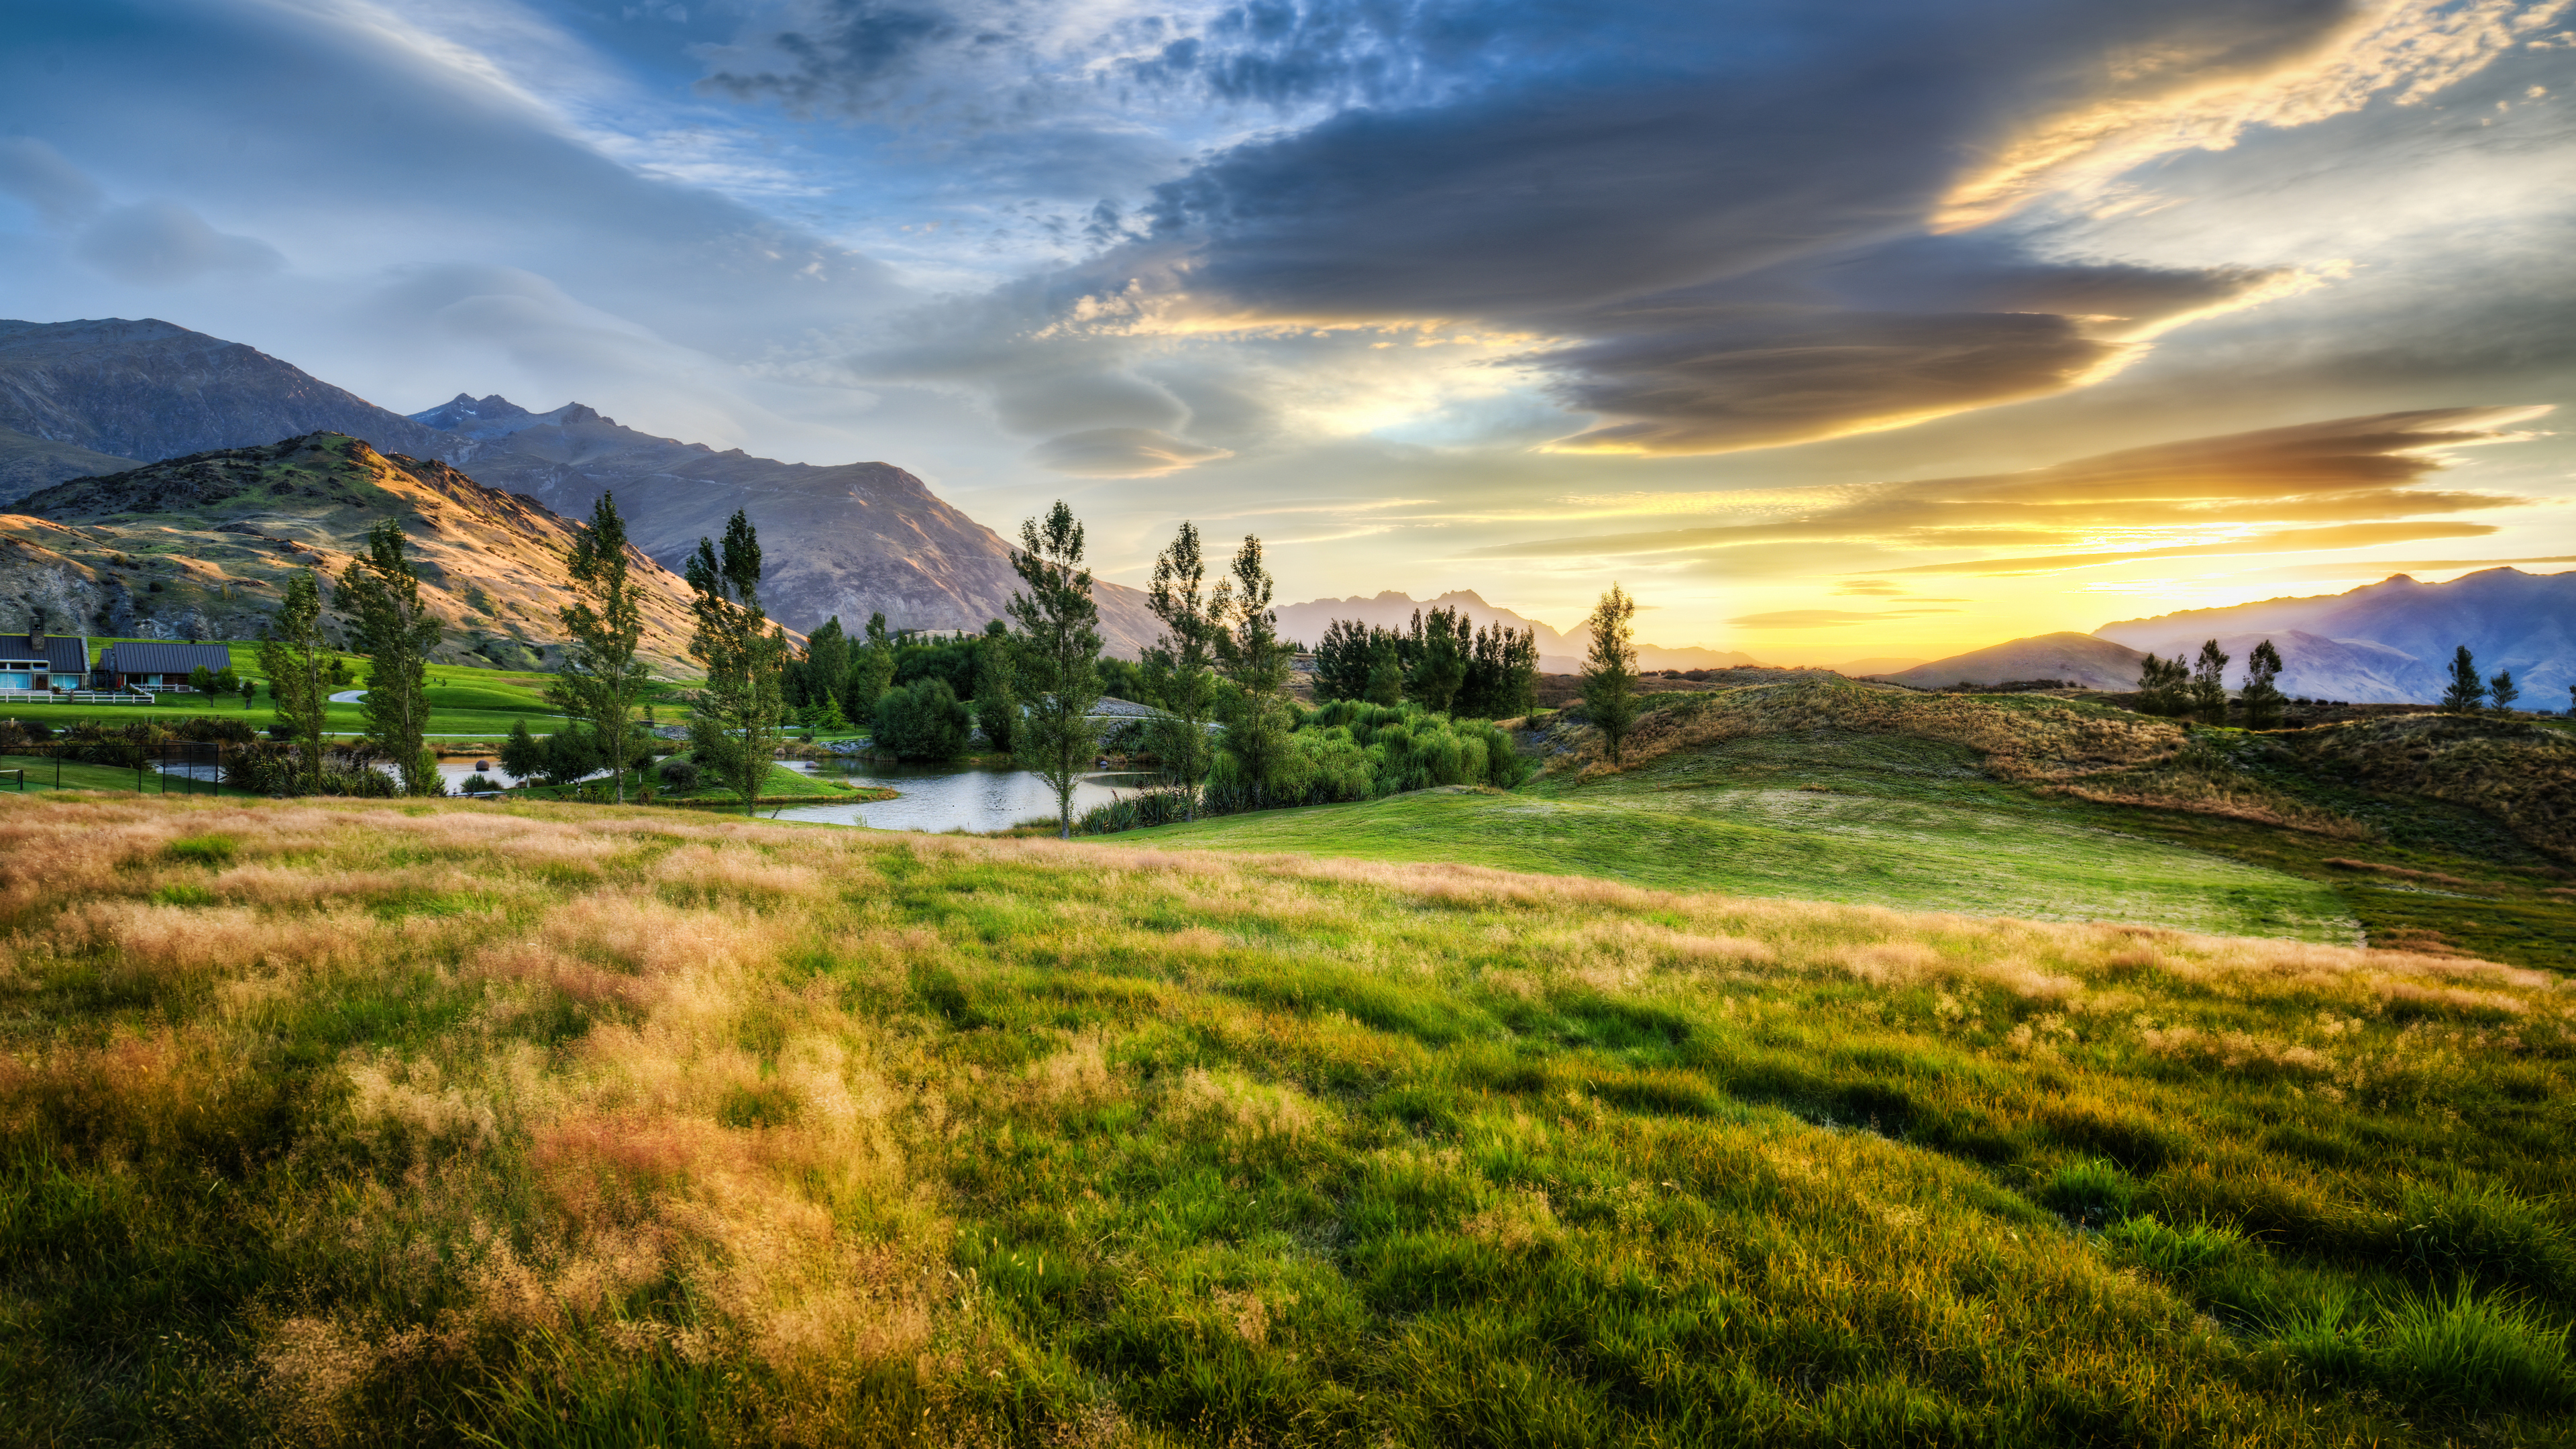 Trey Ratcliff Photography Landscape New Zealand Nature Trees Clouds Mountains Sky Sunset Glow 3840x2160